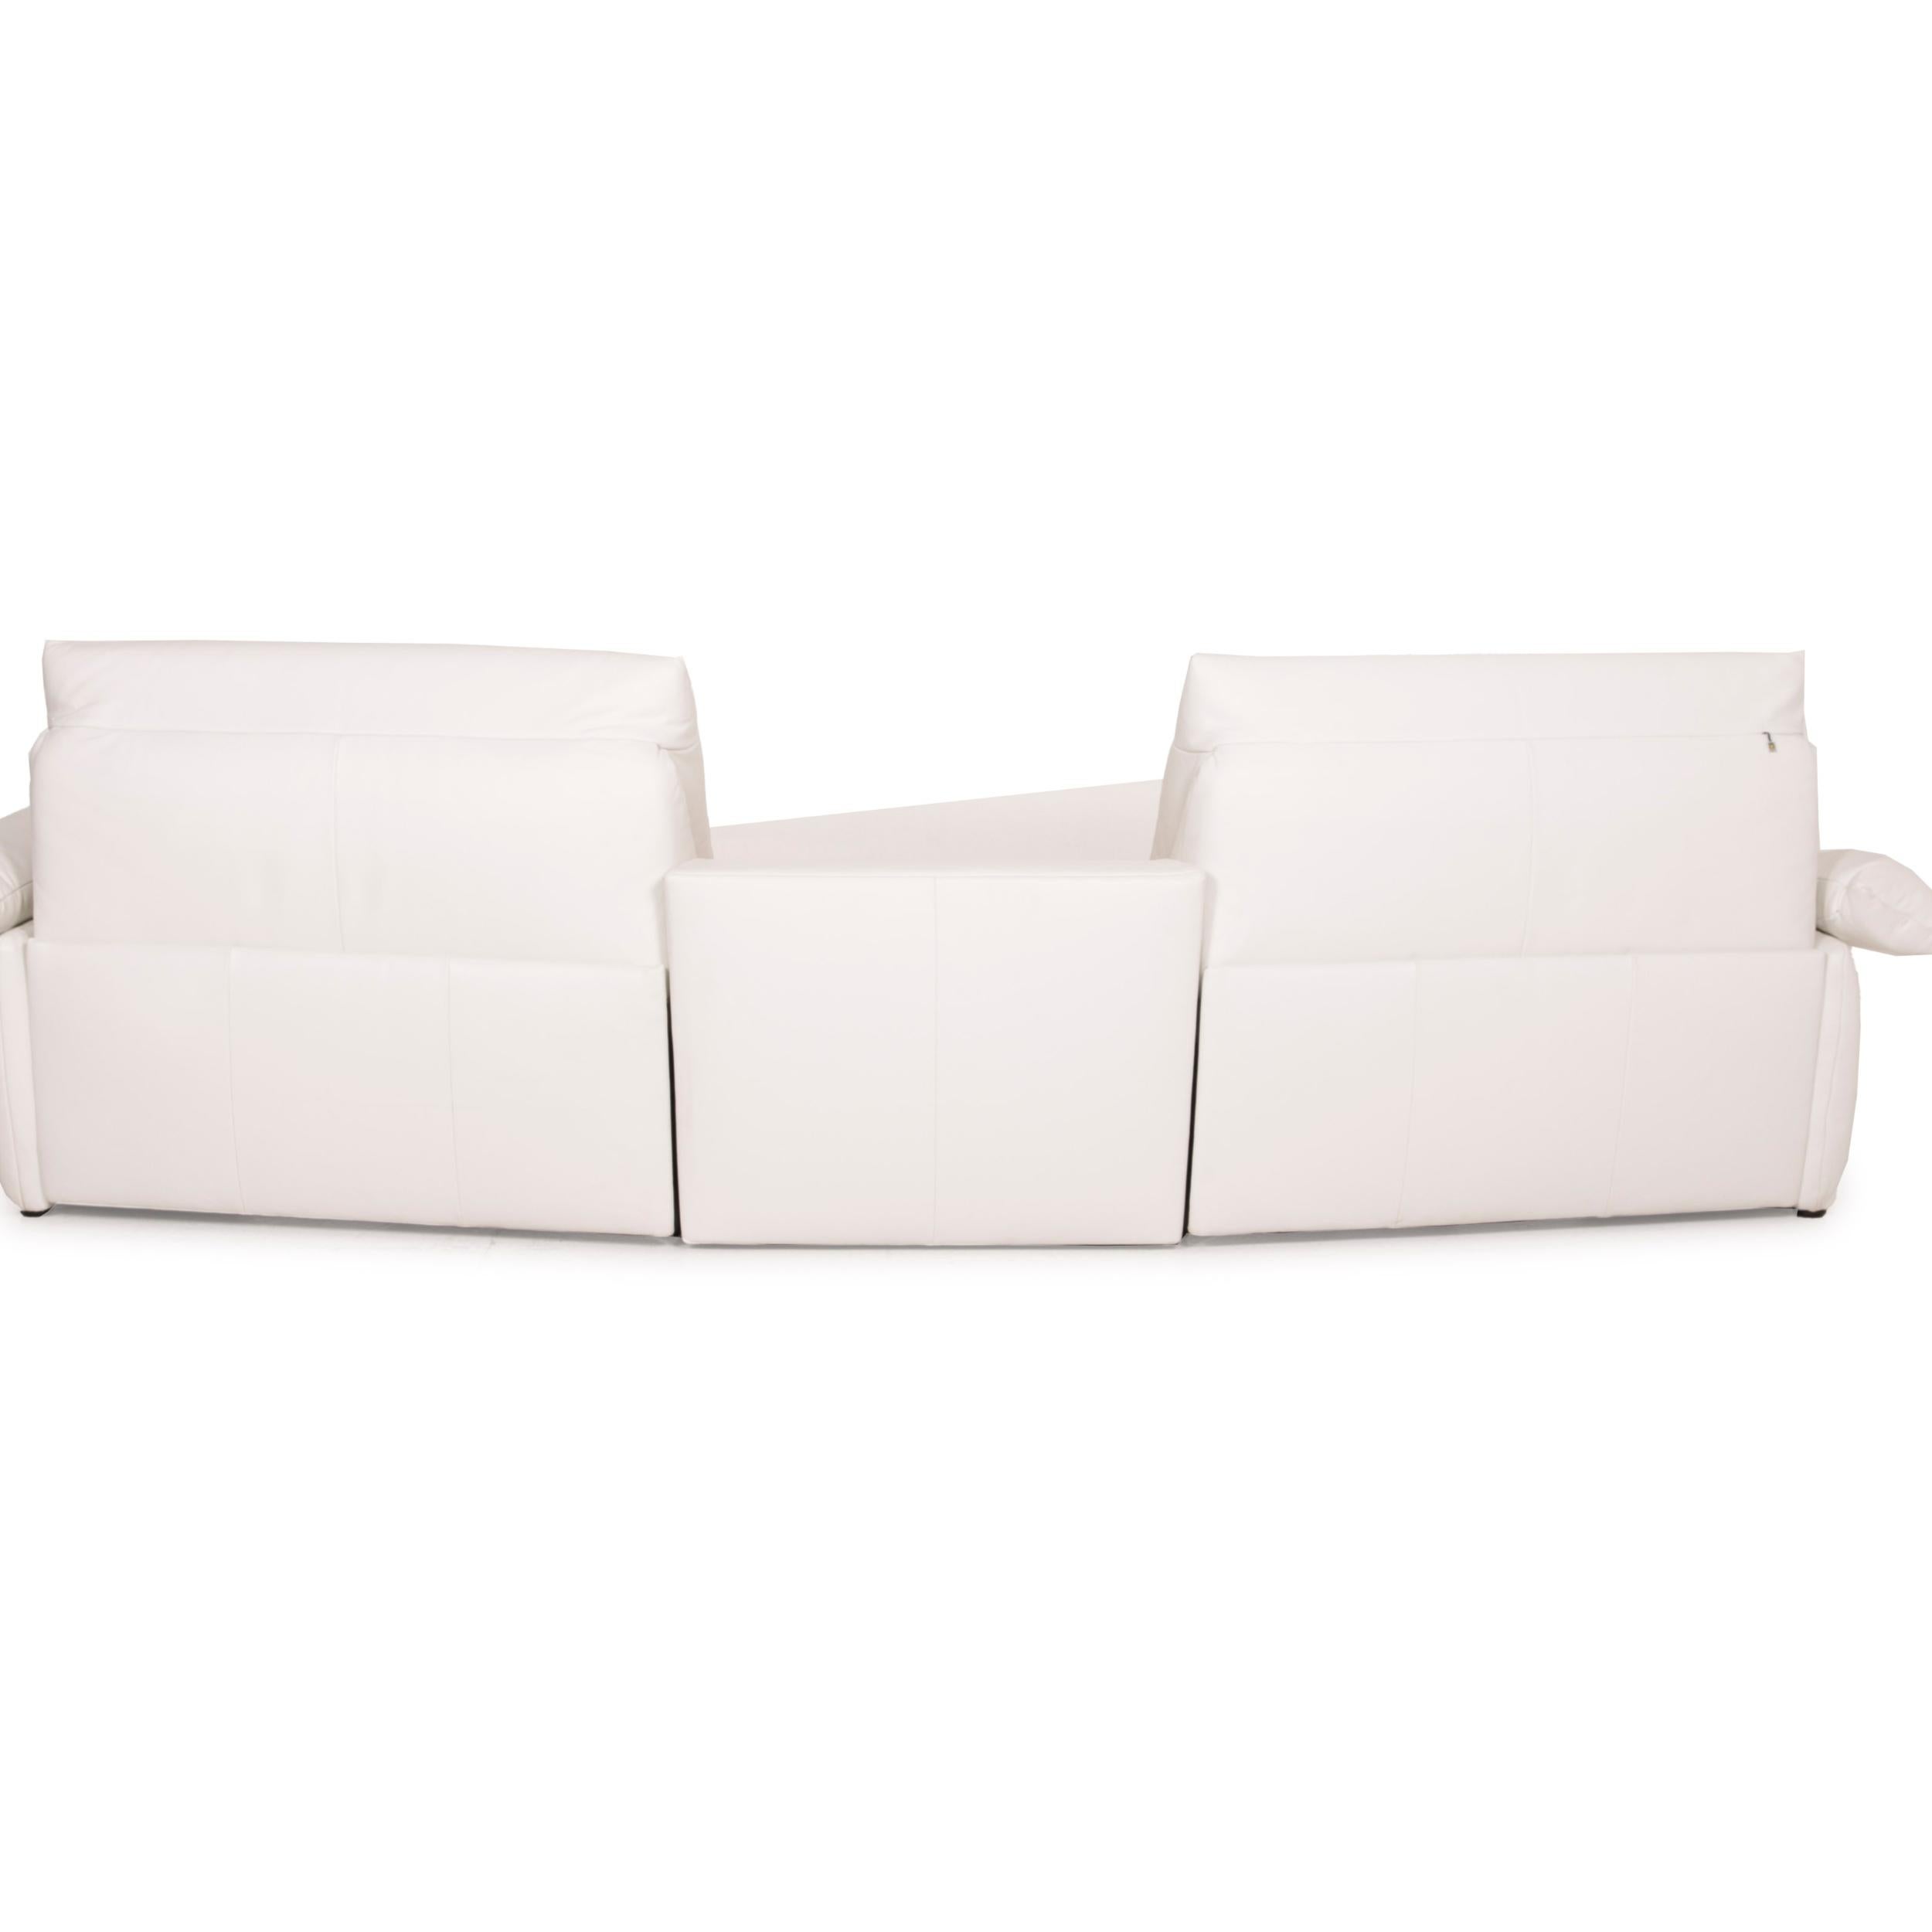 Koinor Leather Sofa Cream Two-Seater Electric Relaxation Function Storage Space 1